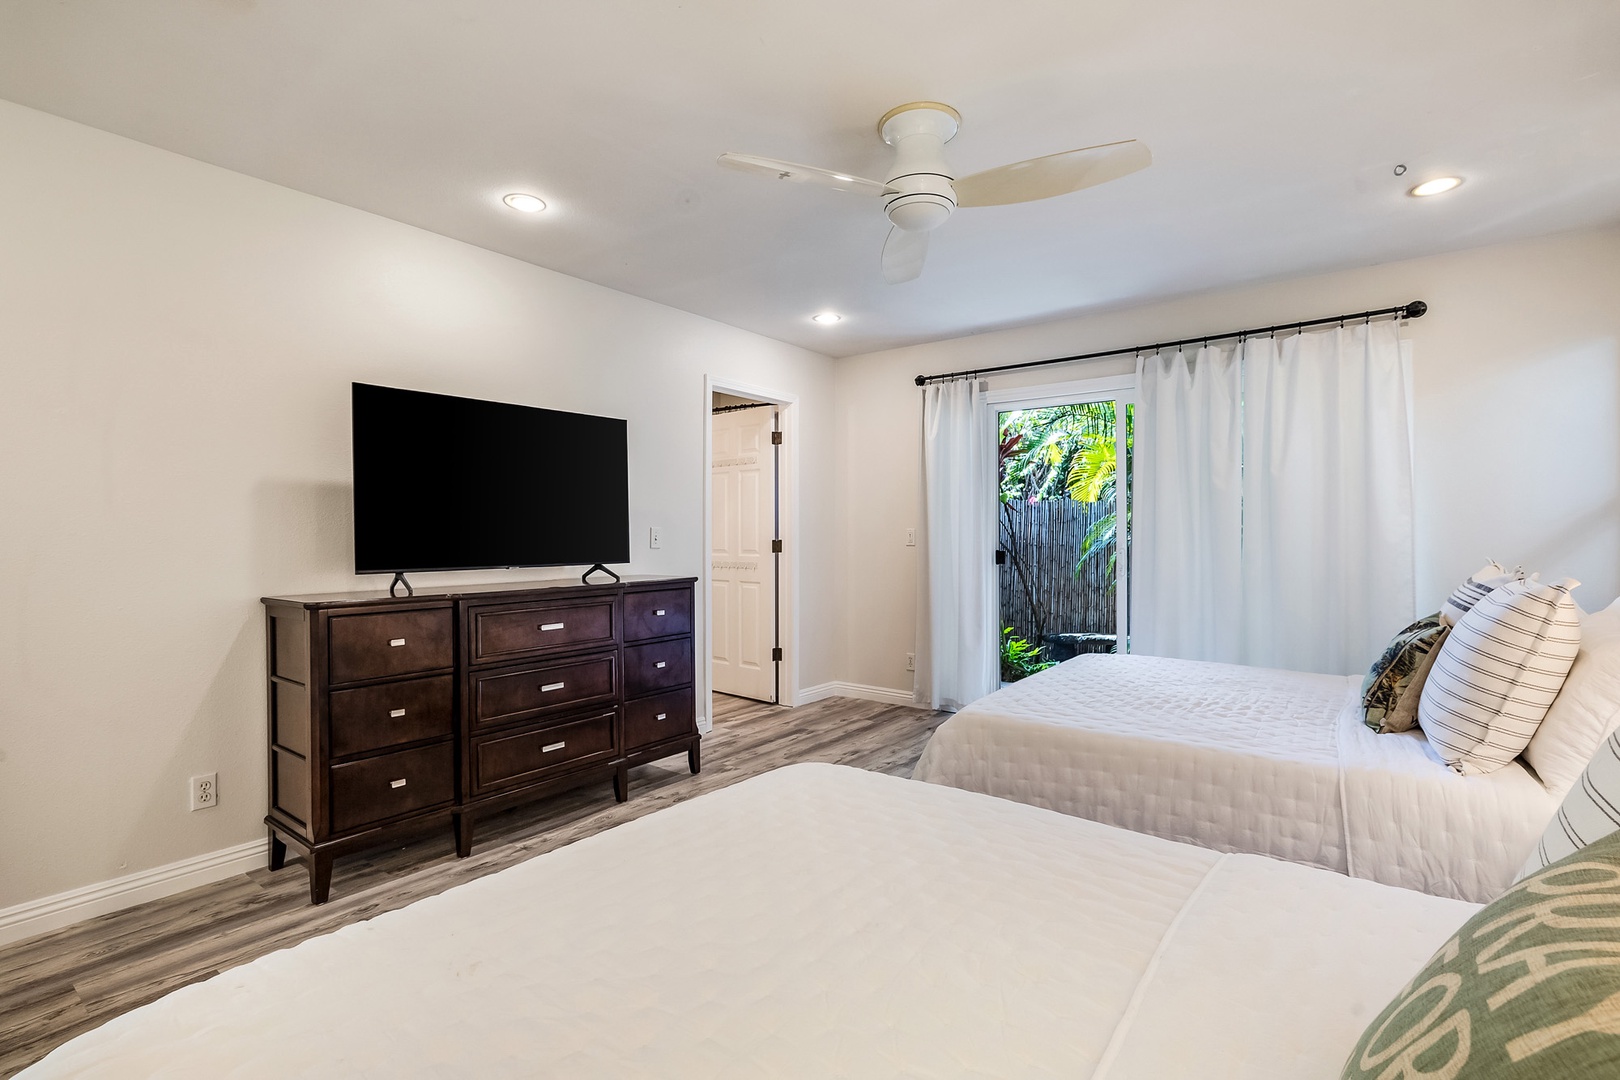 Honolulu Vacation Rentals, Hale Ho'omaha - There's a flat screen TV and direct access to the exterior